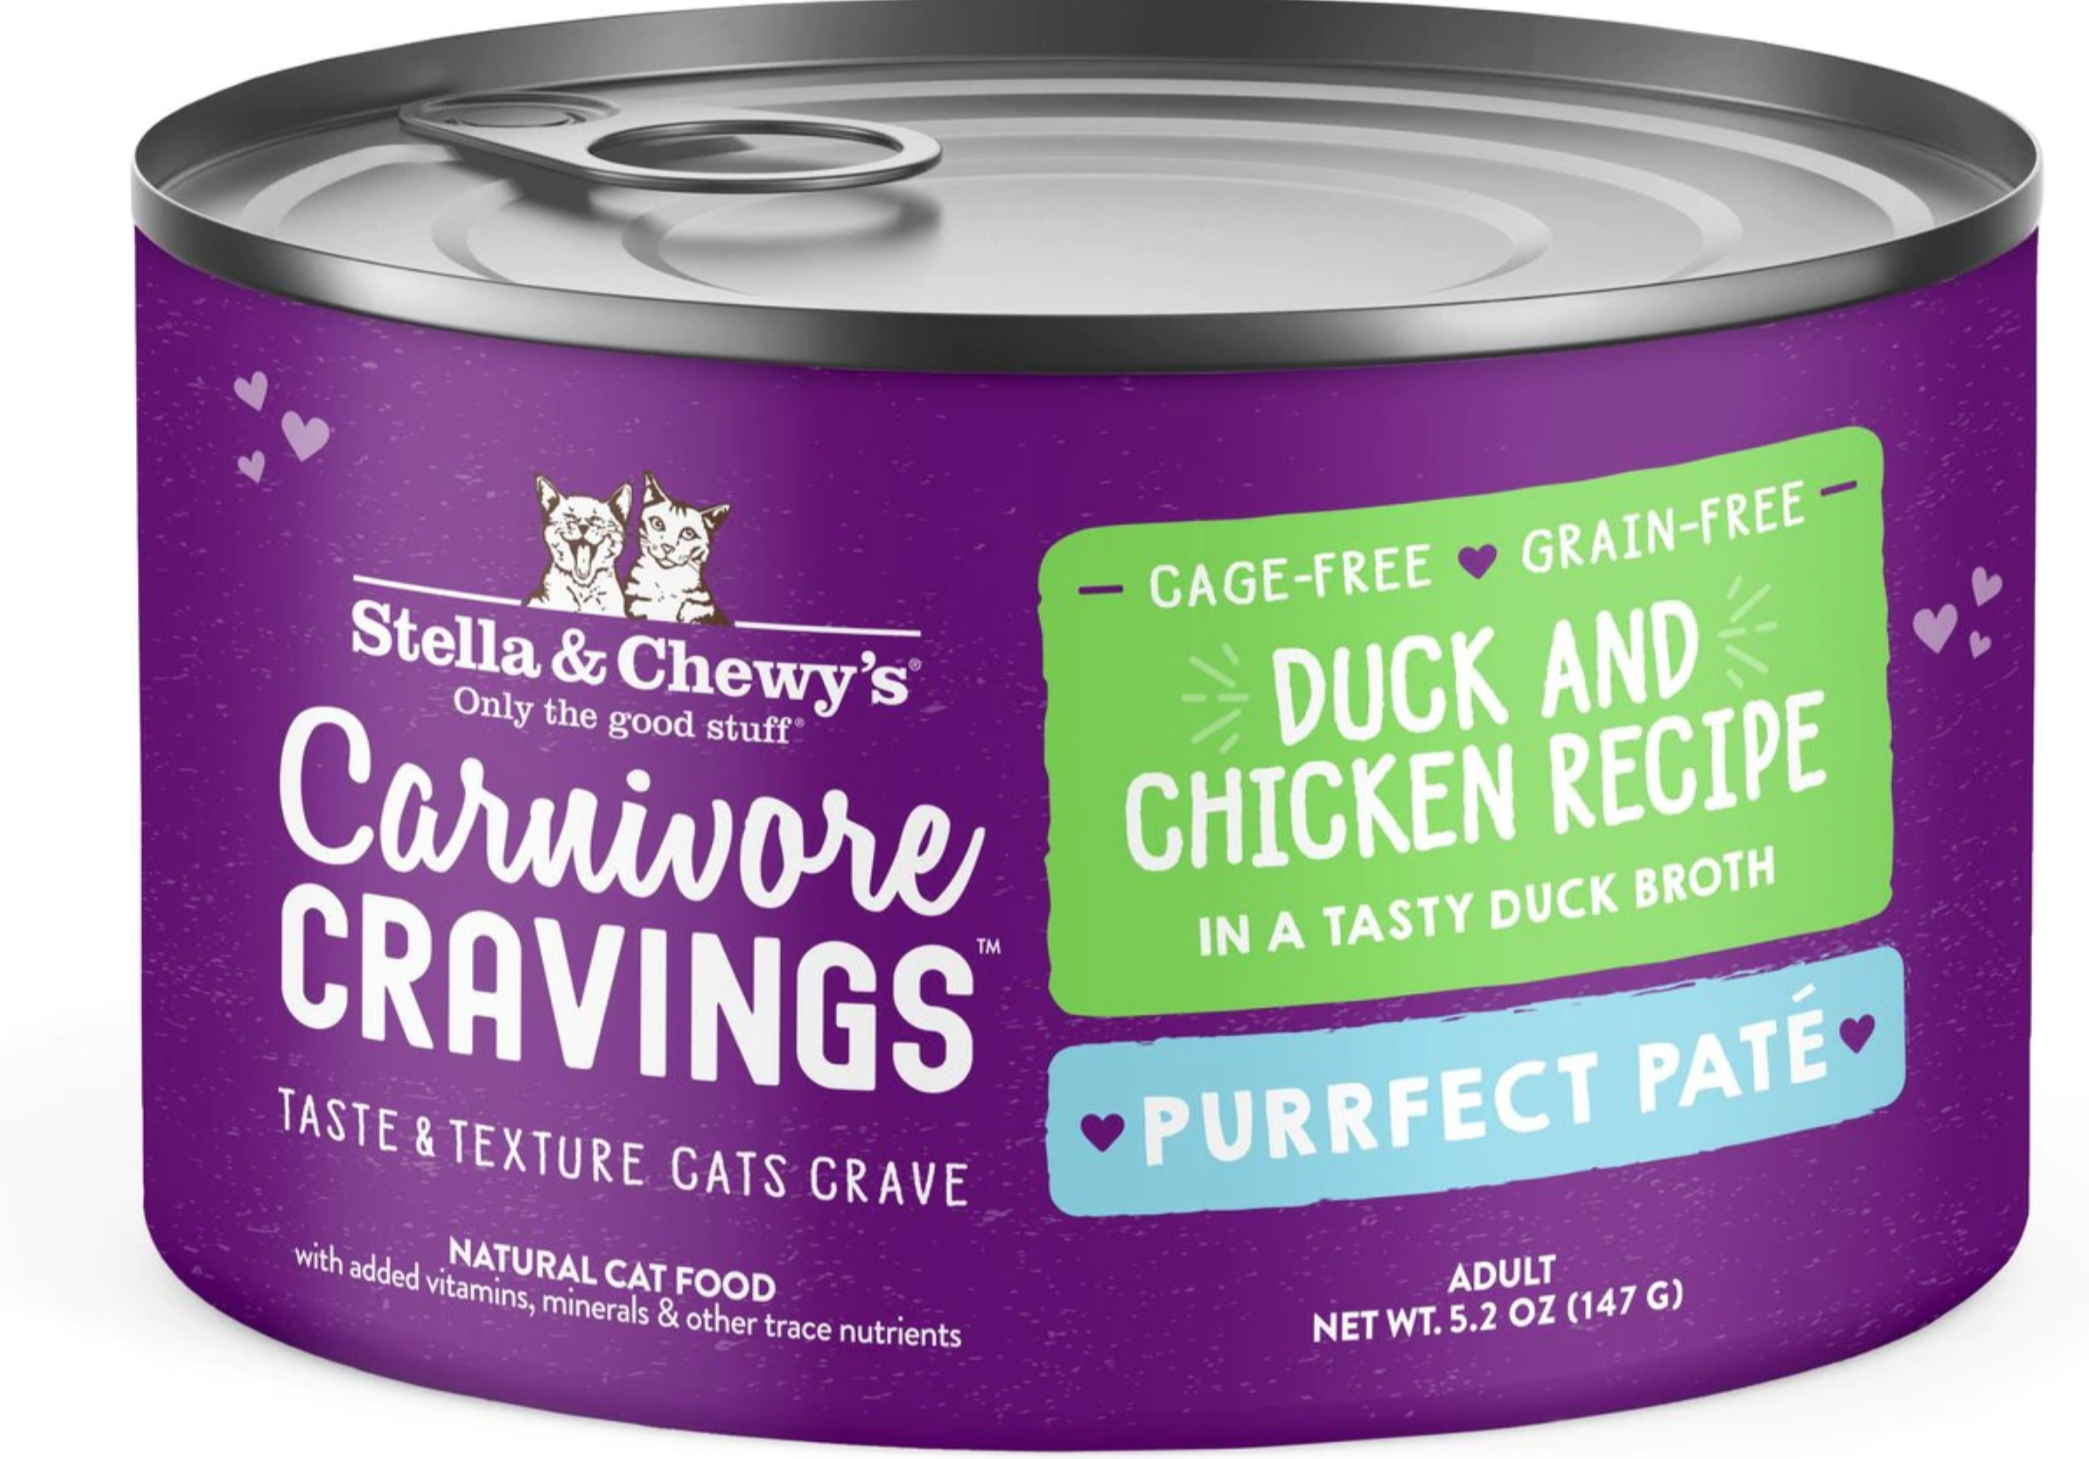 Stella & Chewy's Carnivore Cravings Purrfect Pate Duck & Chicken Recipe - 5.2oz Can